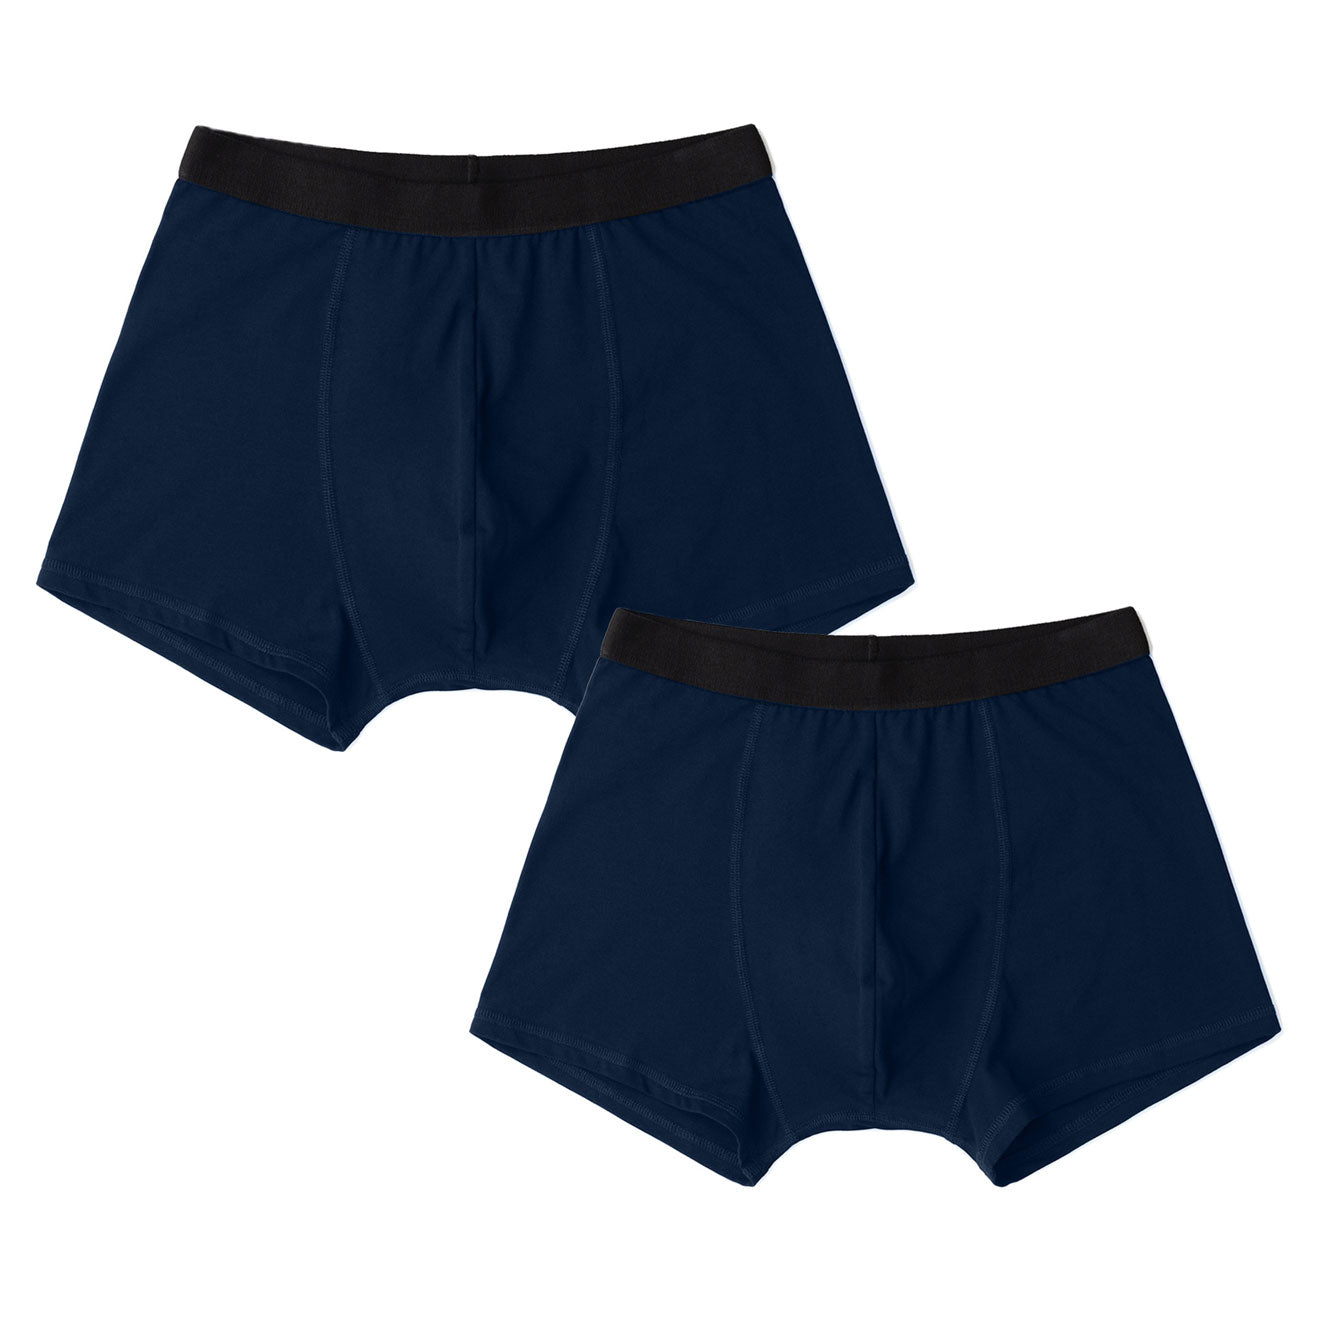 Navy Organic & Recycled cotton Boxer Briefs, first fit promise 2 pack